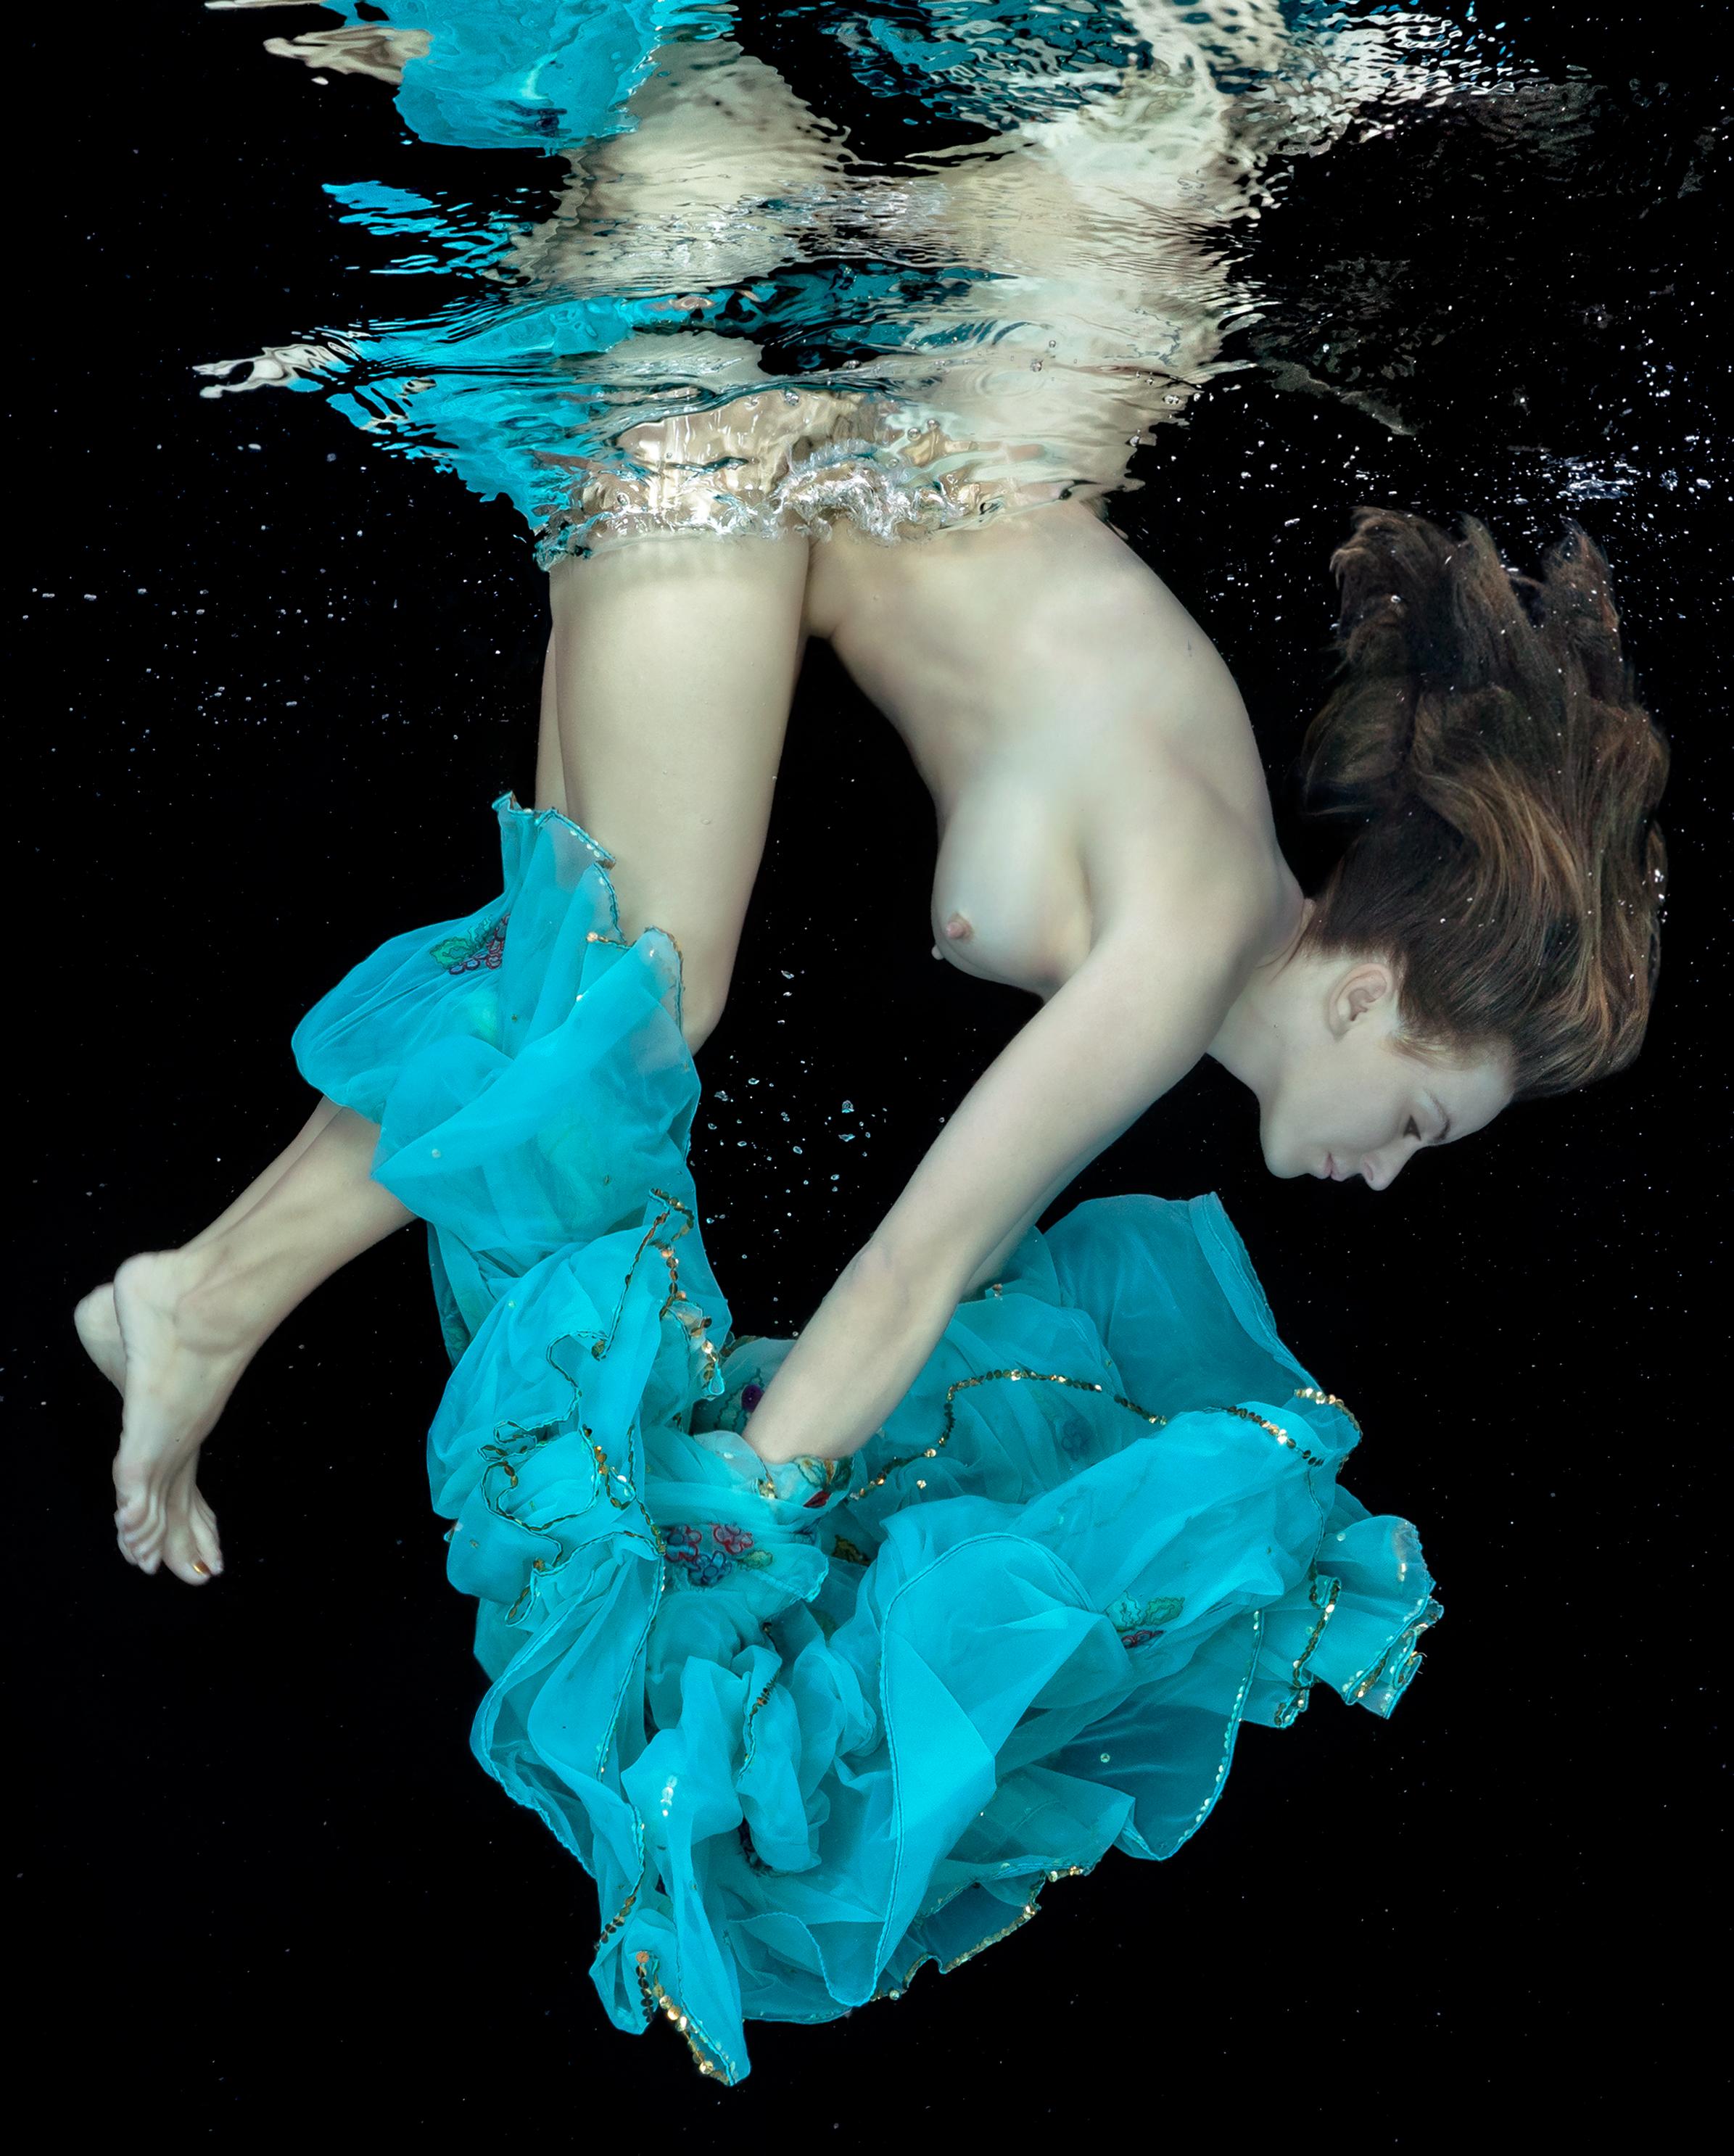 Porcelain and Тurquoise - underwater nude photograph - archival pigment 48x35